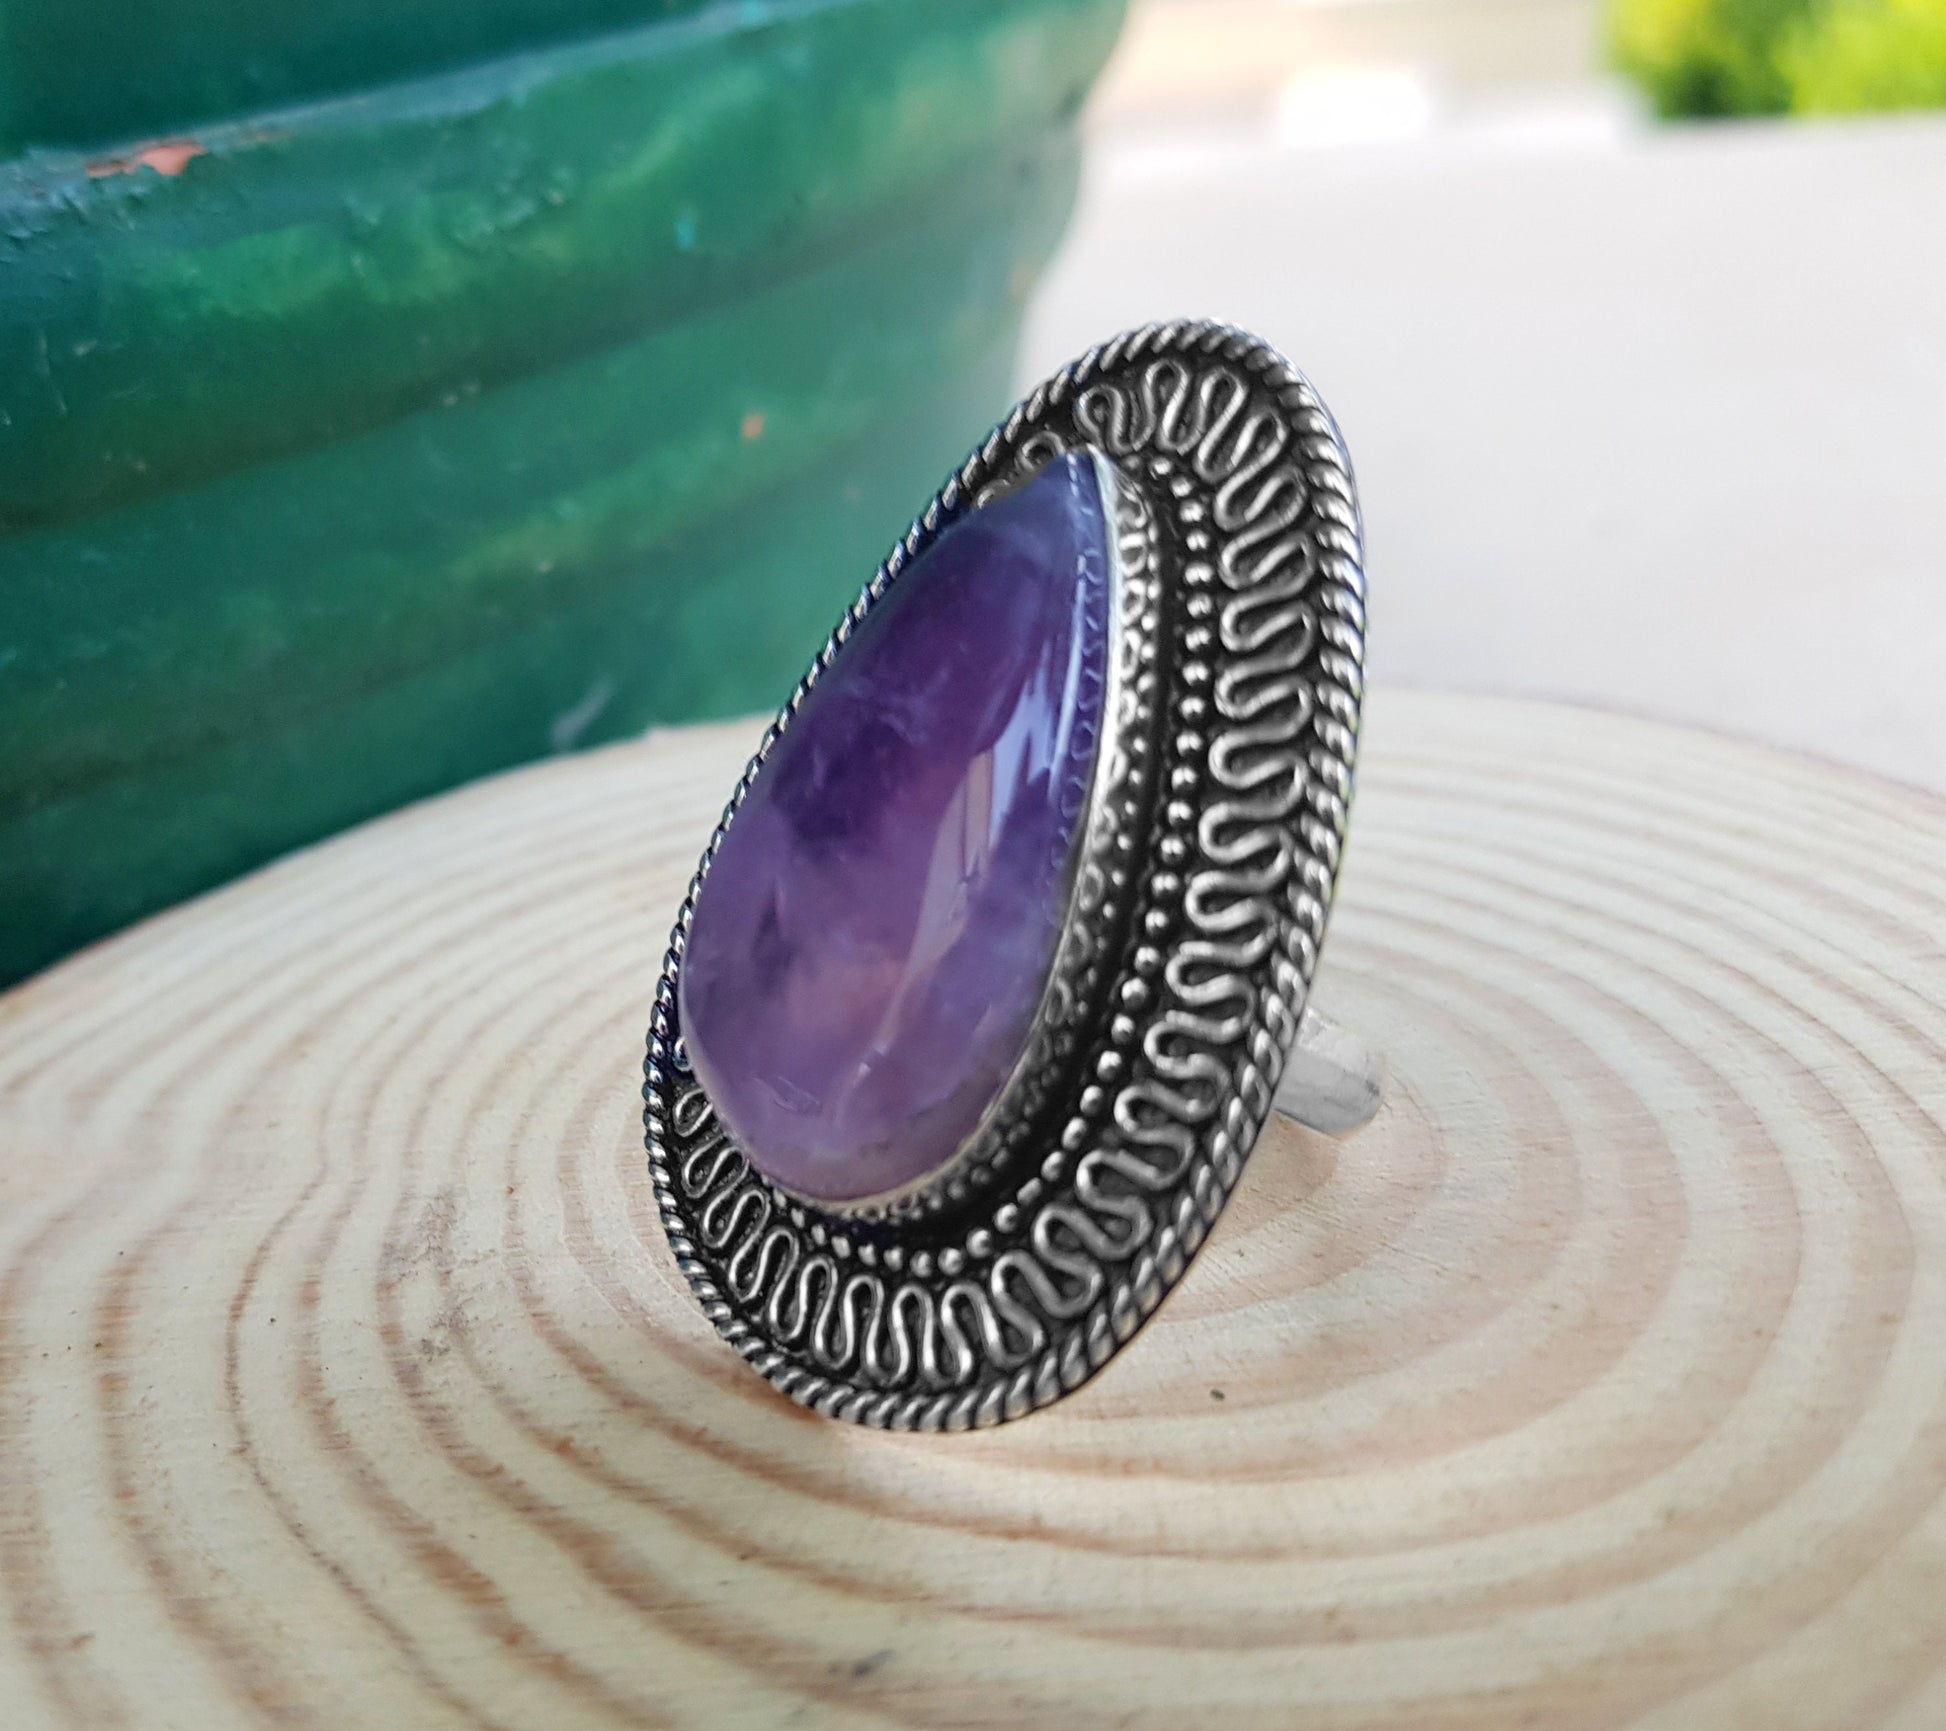 Natural Amethyst Ring Big Statement Ring Size US 8 Sterling Silver Gemstone Ring Boho Rings Unique Gift For Women One Of A Kind Jewelry